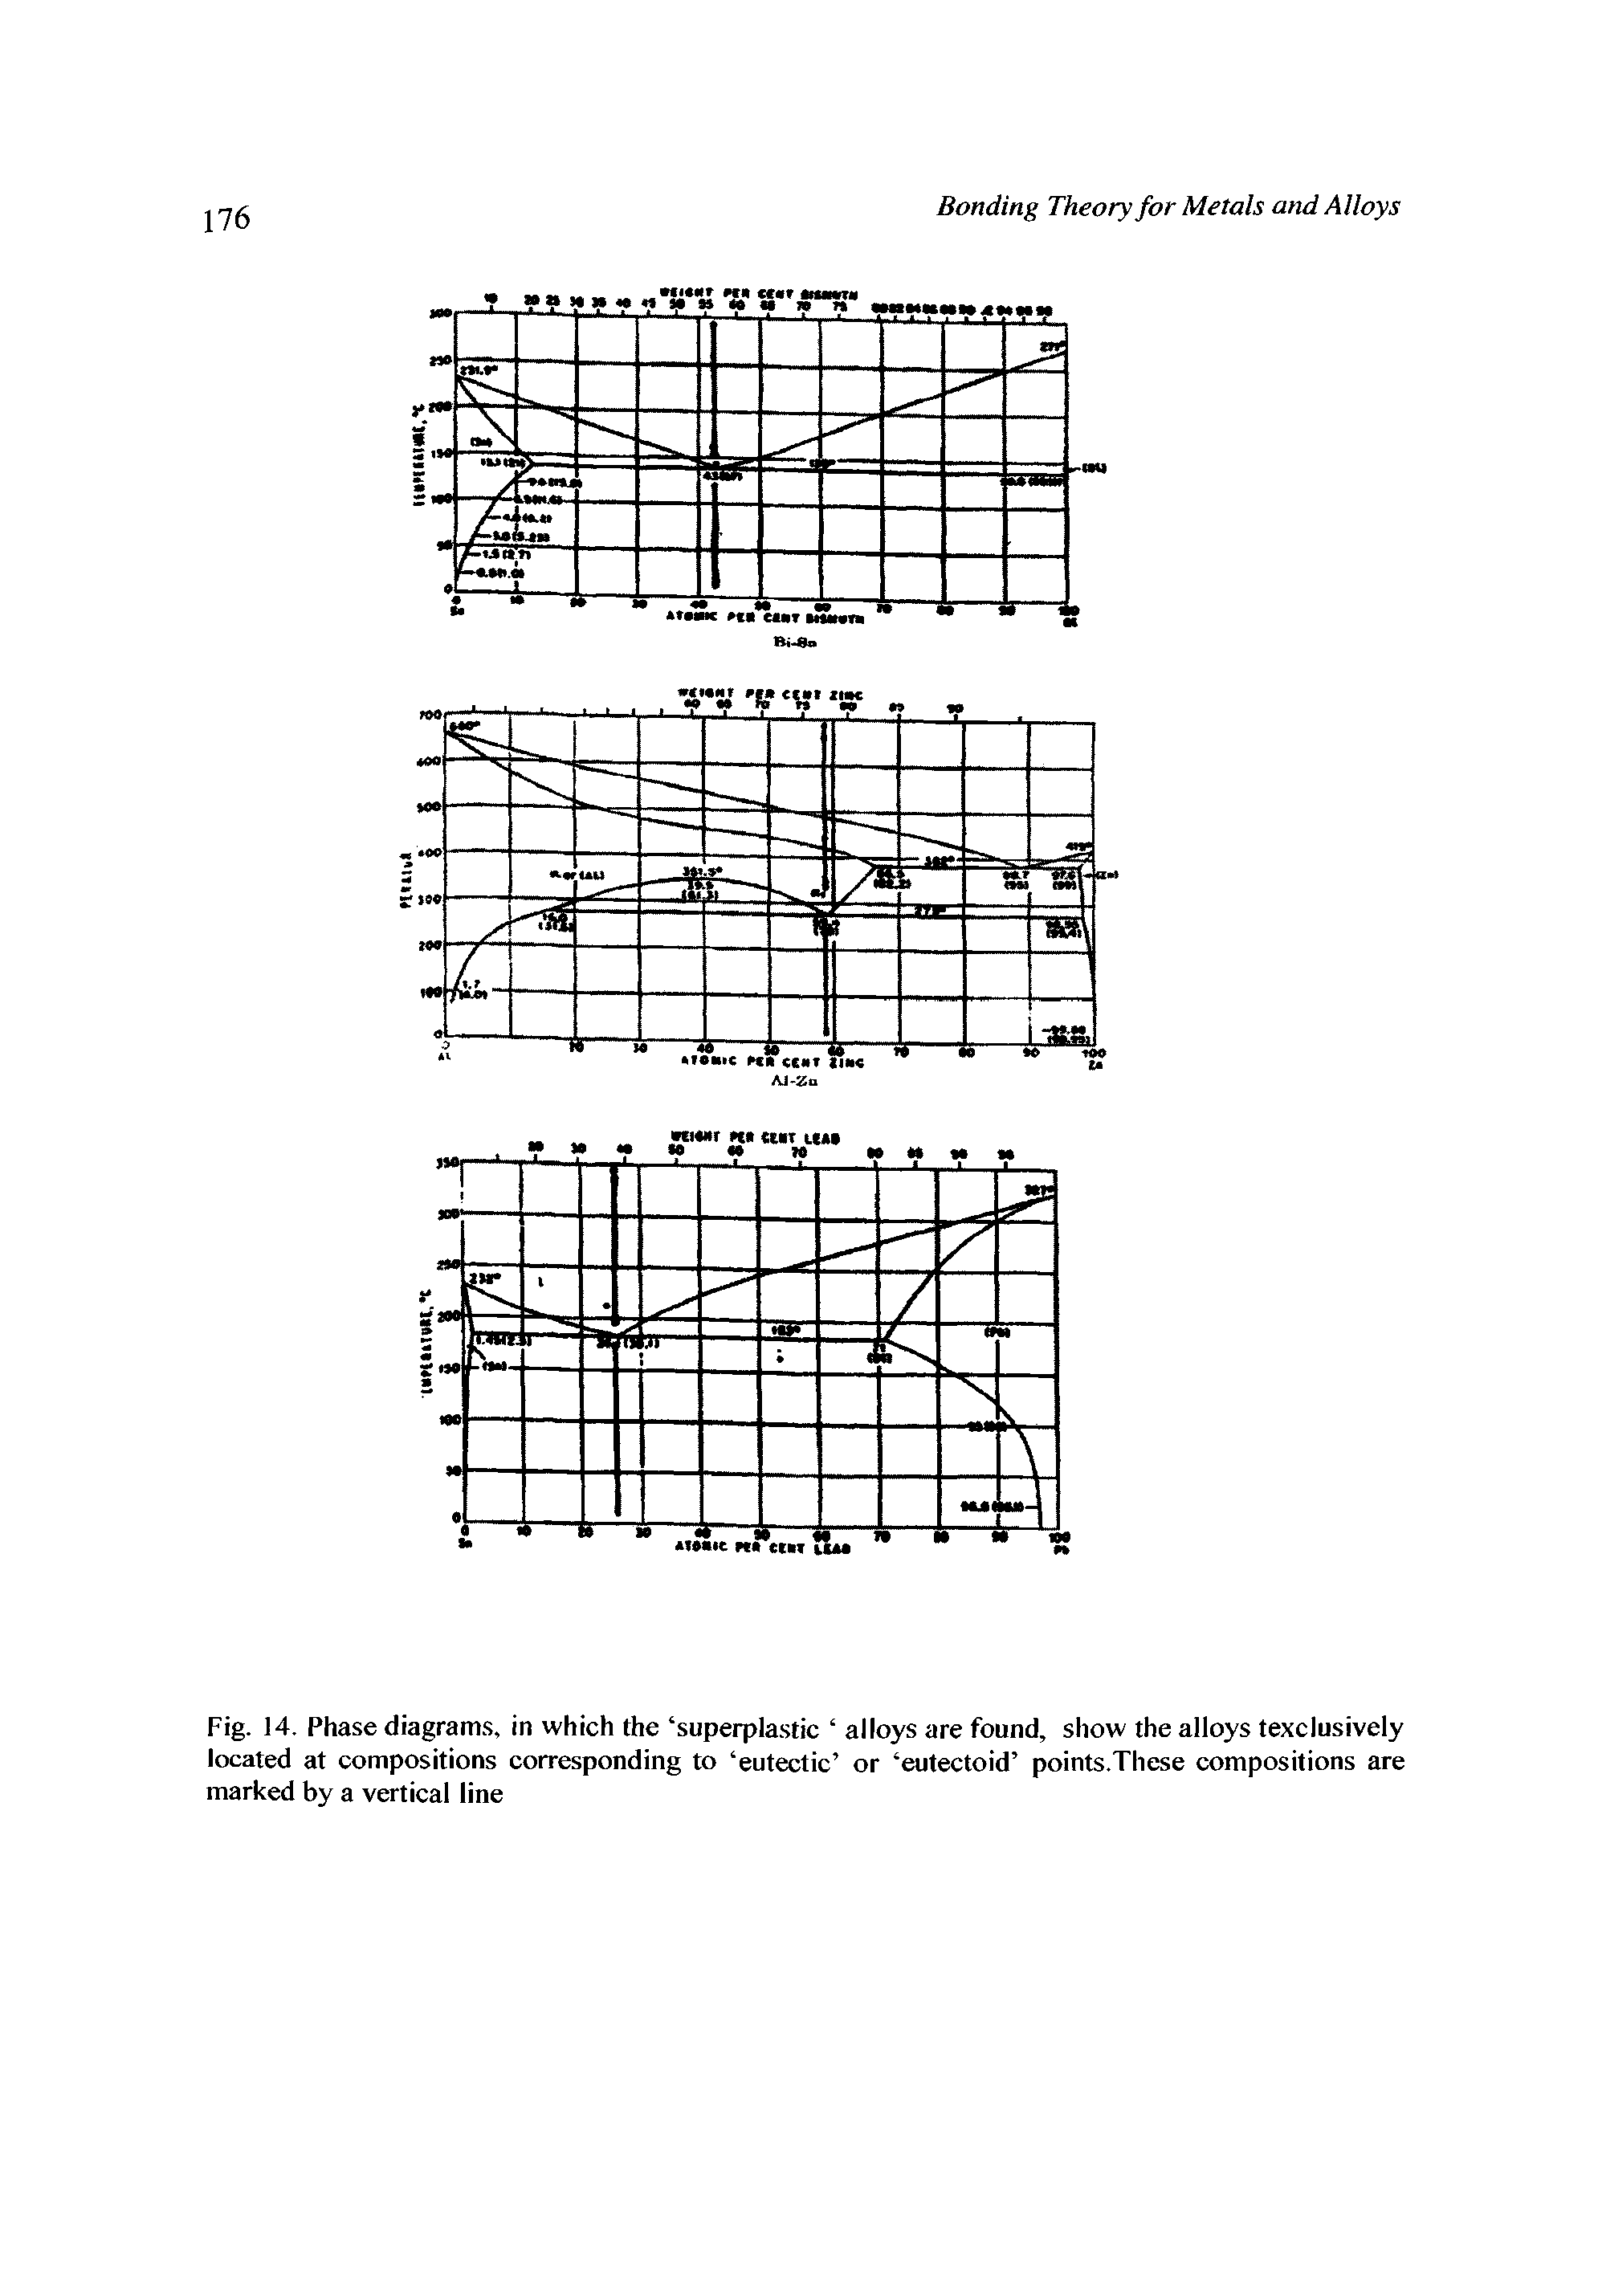 Fig. 14. Phase diagrams, in which the superplastic alloys are found, show the alloys texclusively located at compositions corresponding to eutectic or eutectoid points.These compositions are marked by a vertical line...